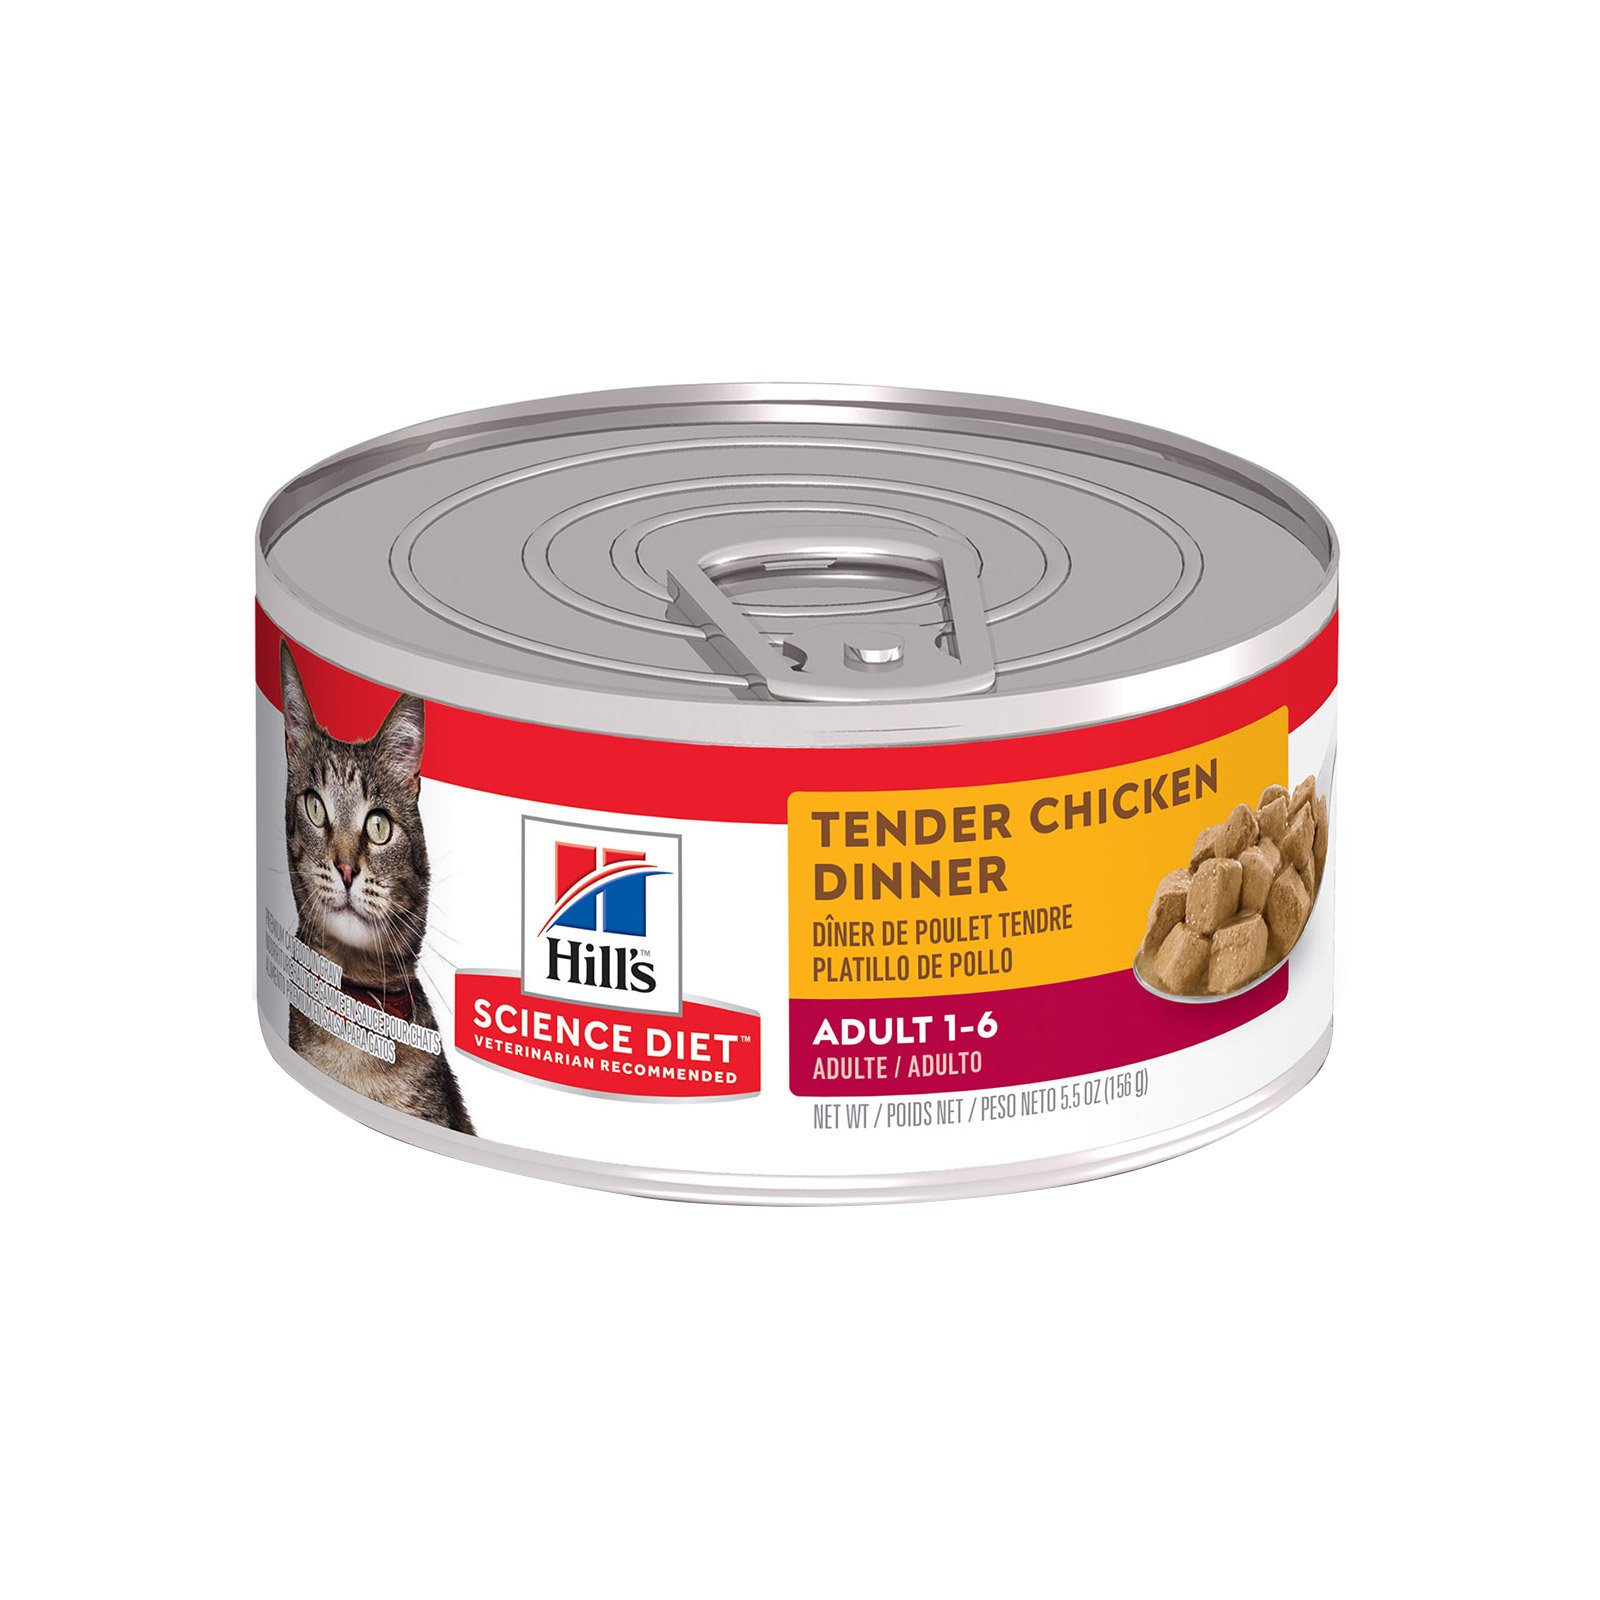 Hill's Science Diet Adult Tender Chicken Dinner Canned Wet Cat Food